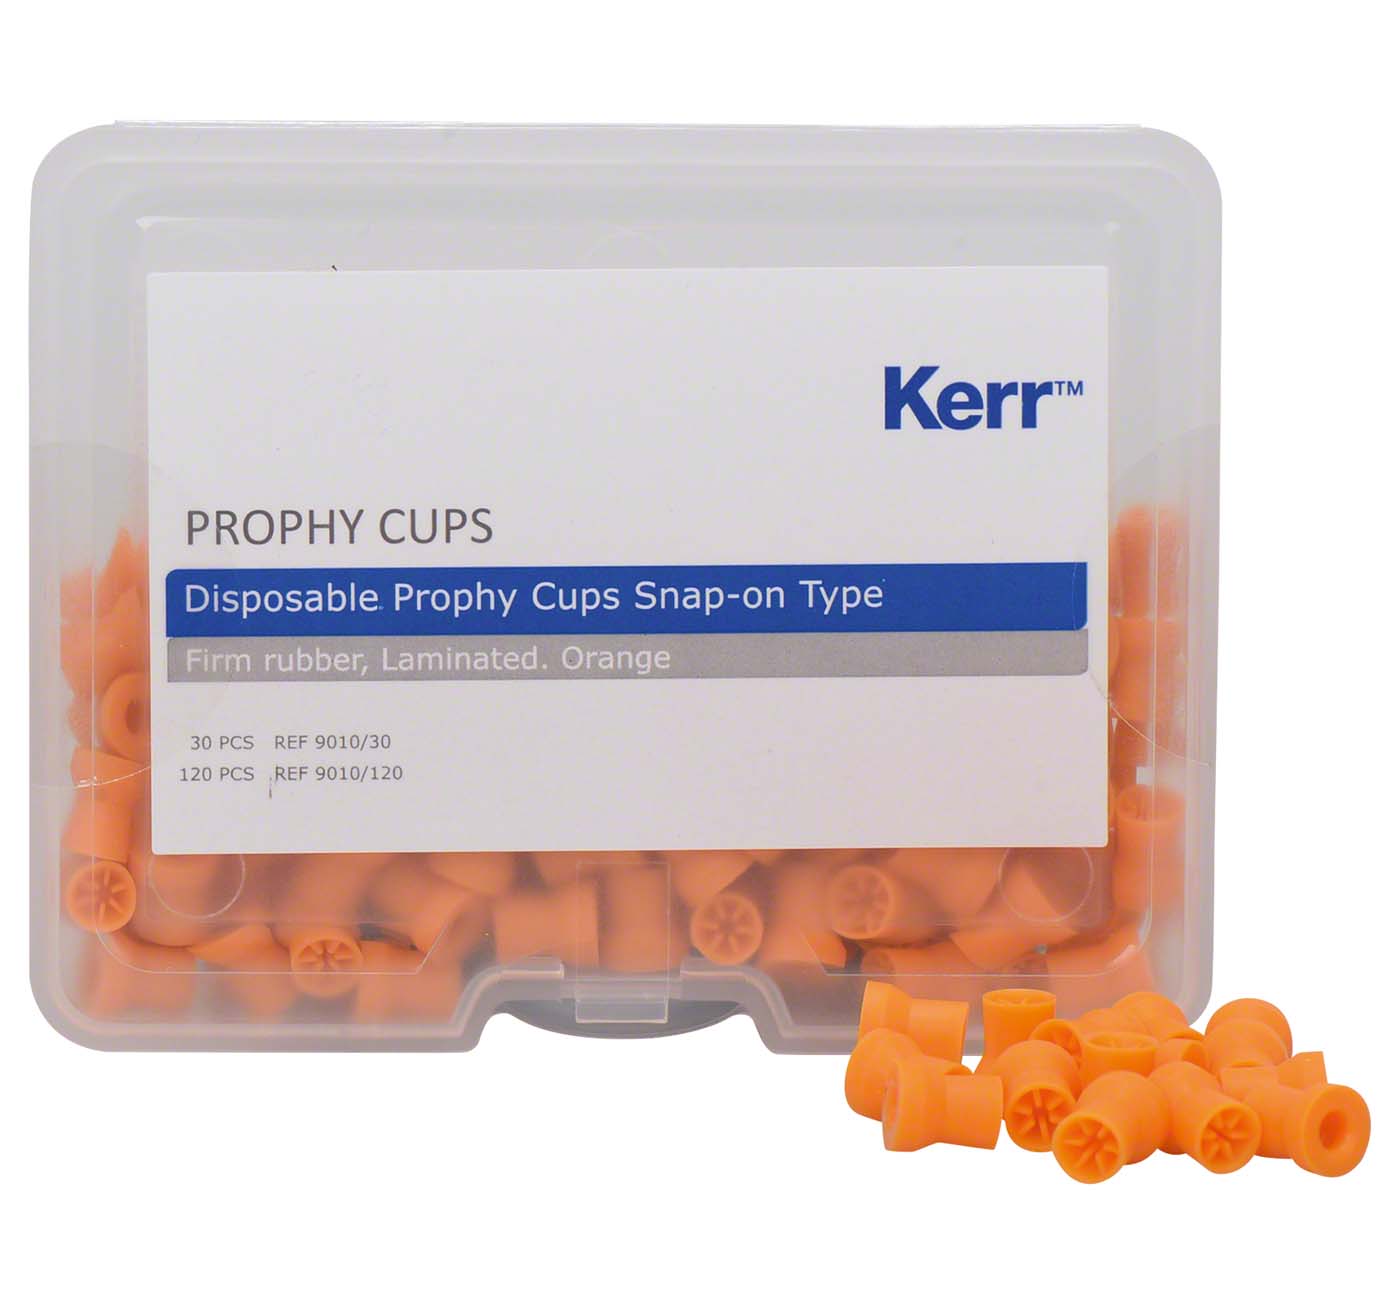 Prophy Cup Snap-On Kerr